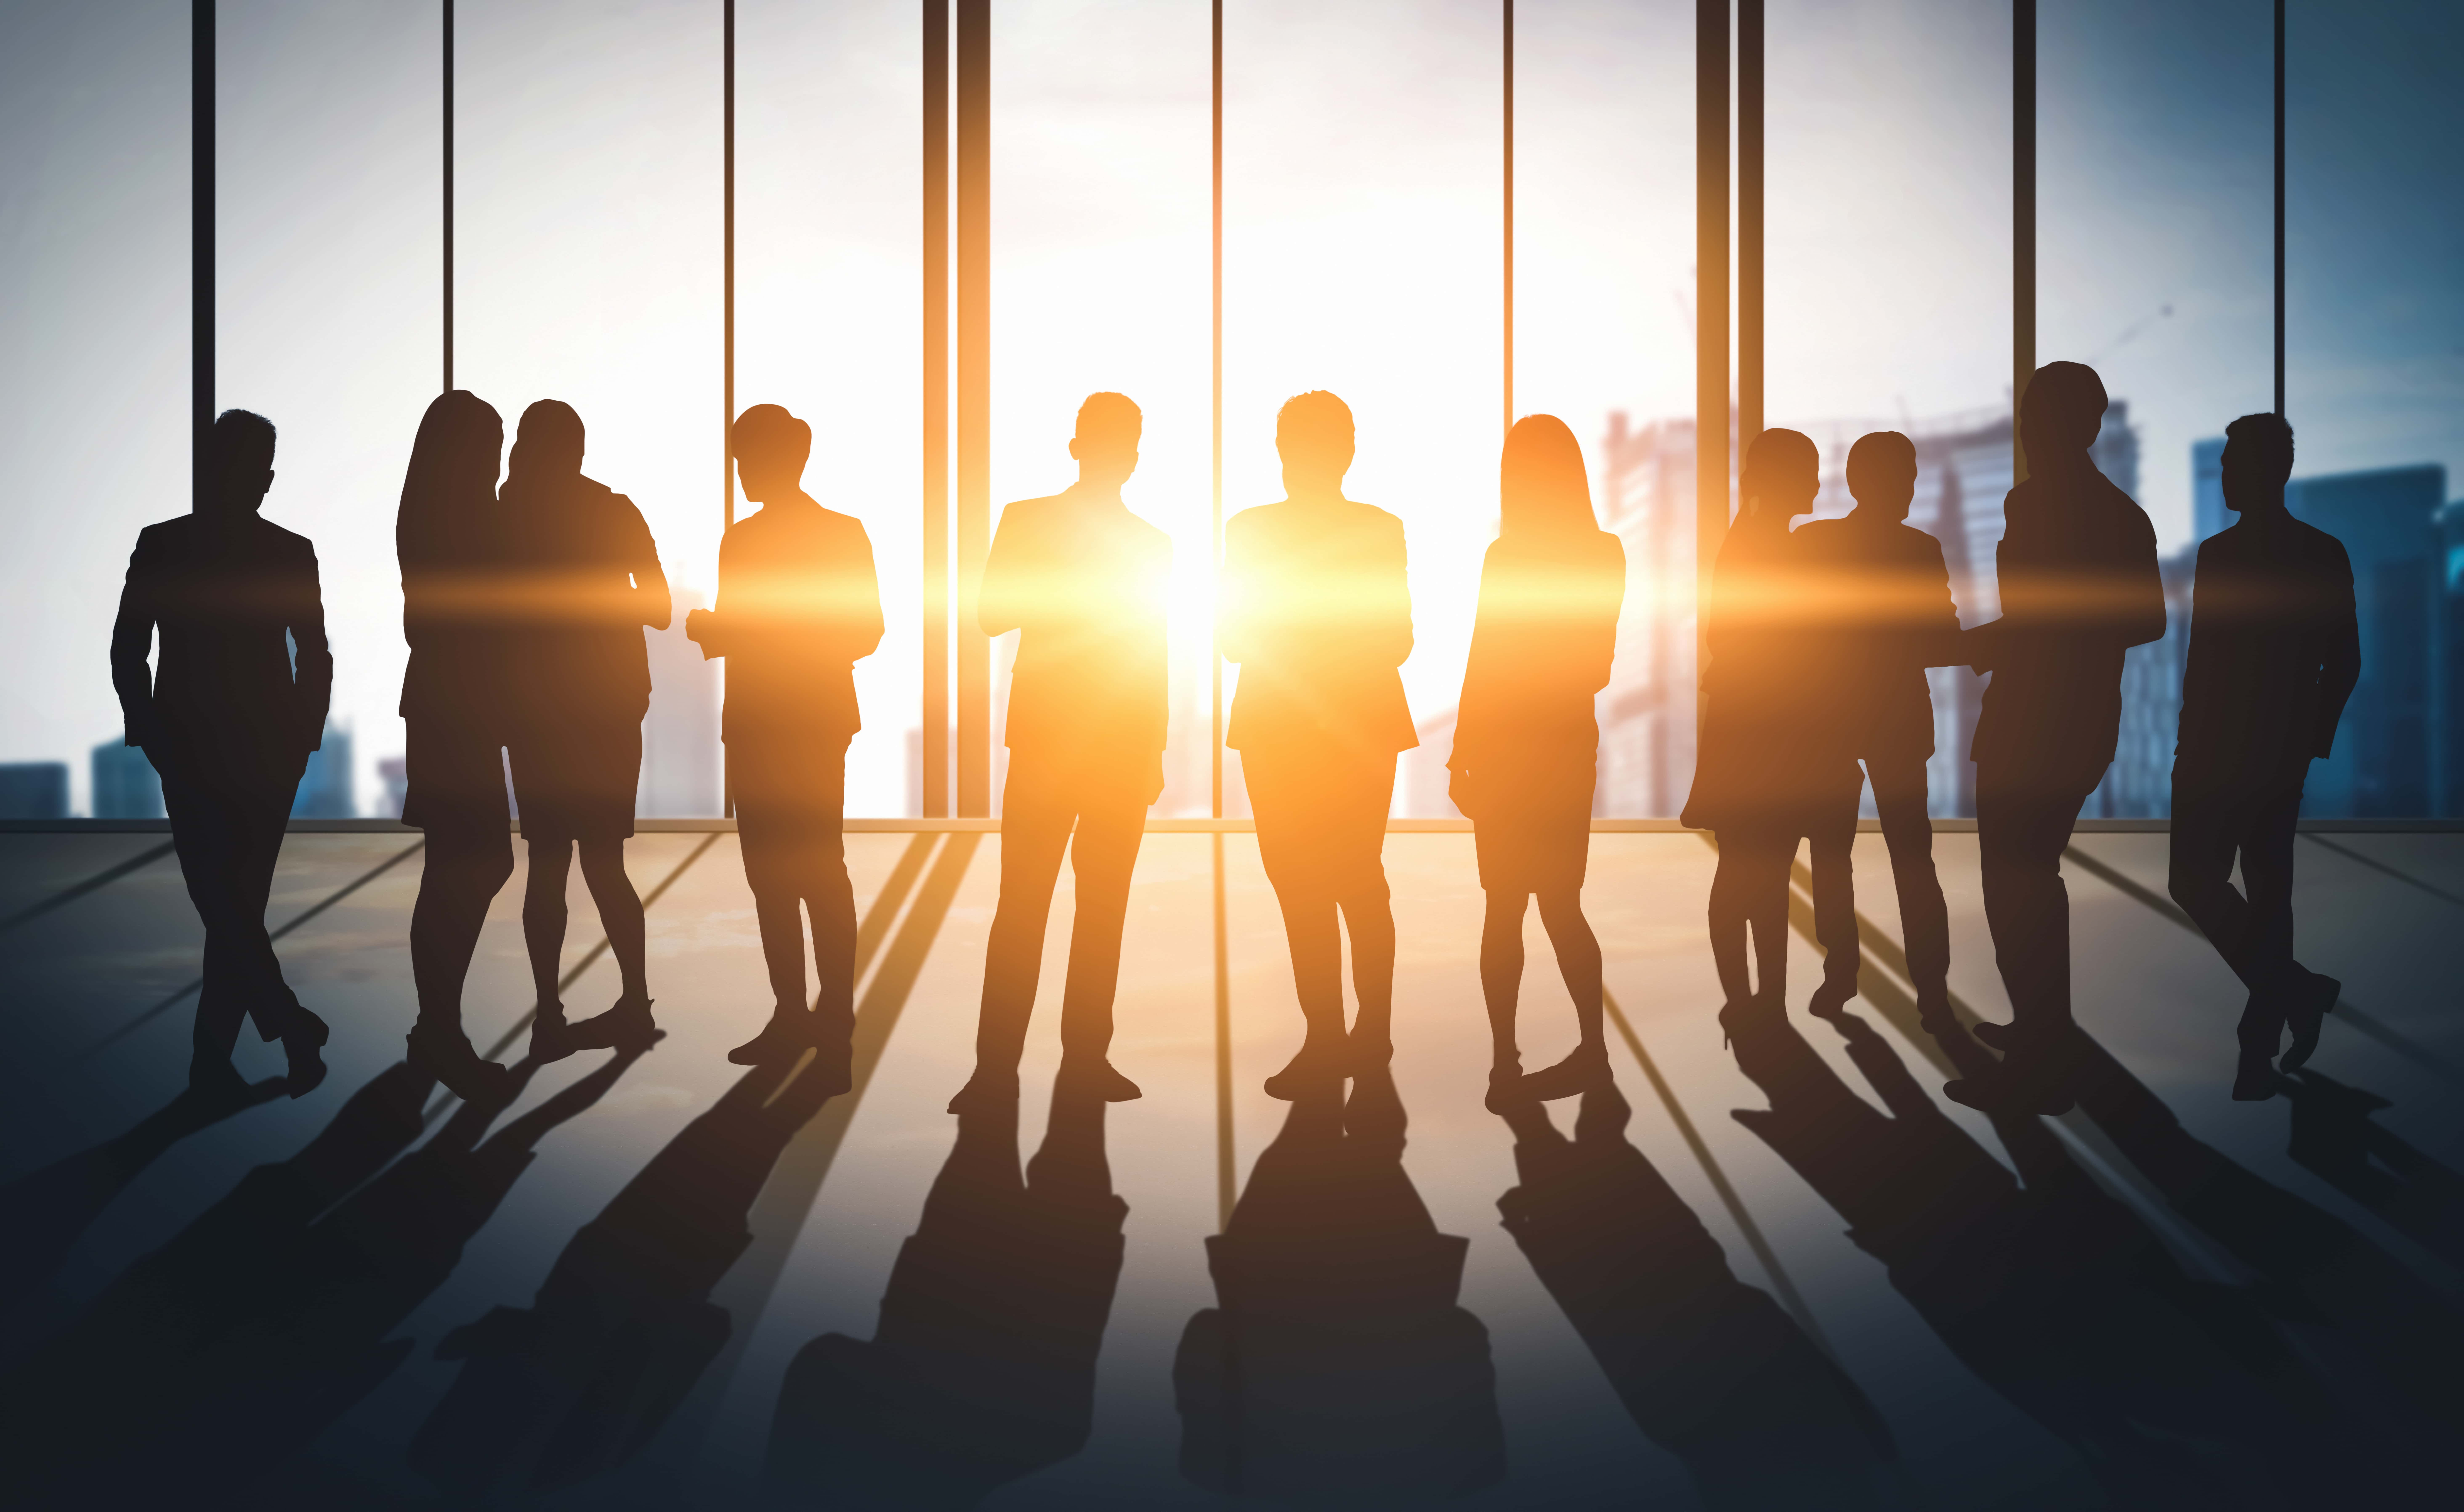 group of business people standing in a line infront of large windows with the sun coming in behind them